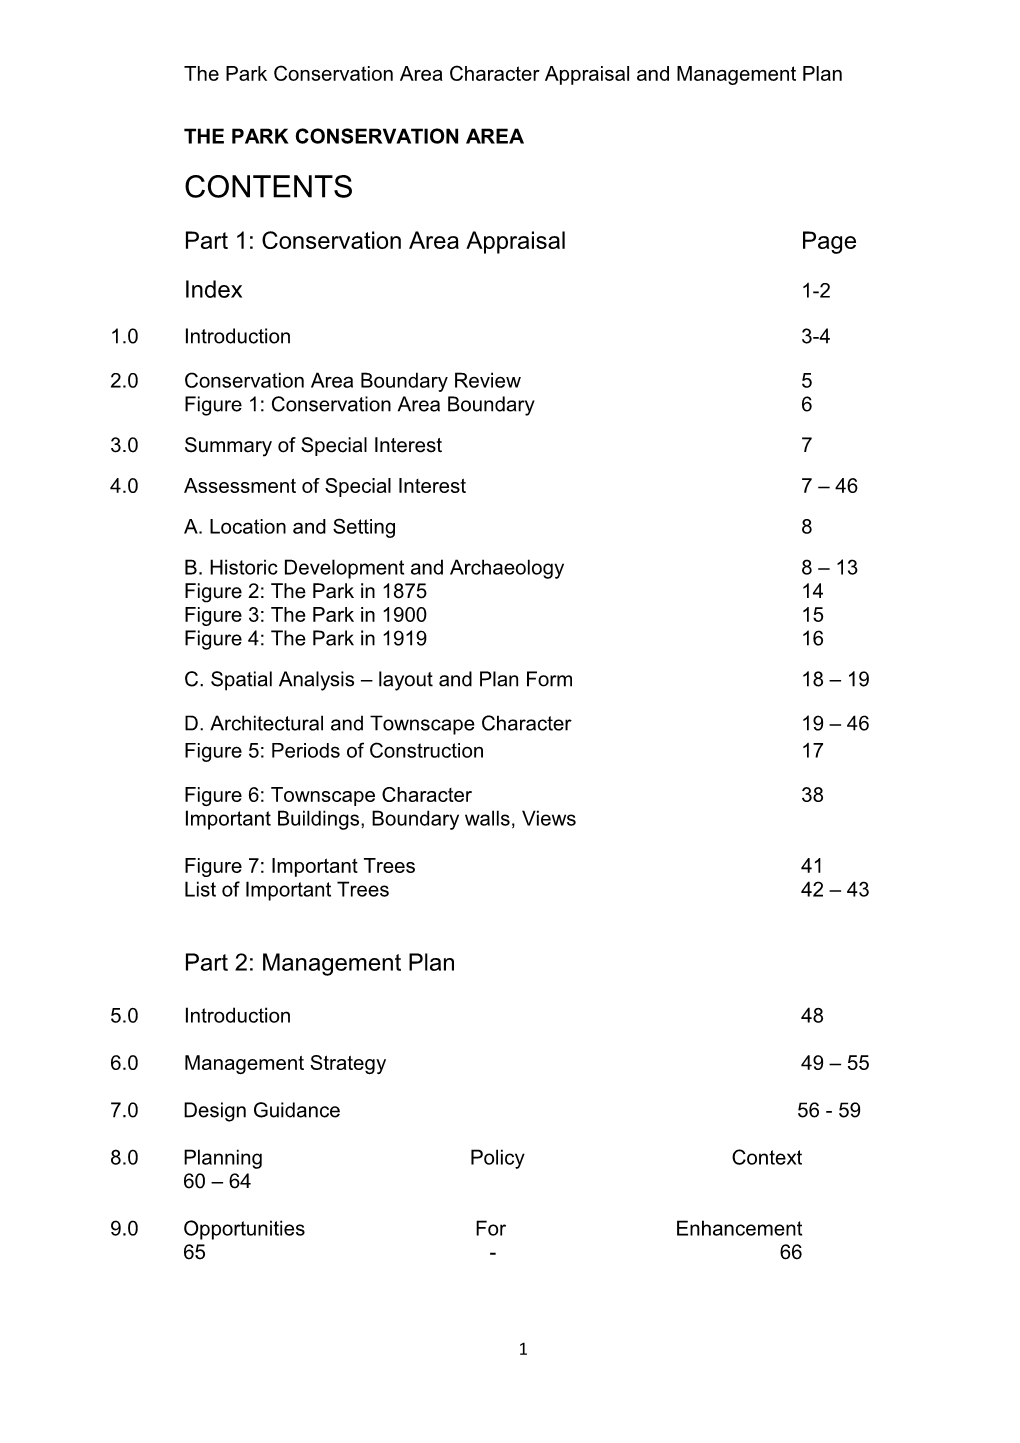 The Park Conservation Area Character Appraisal and Management Plan